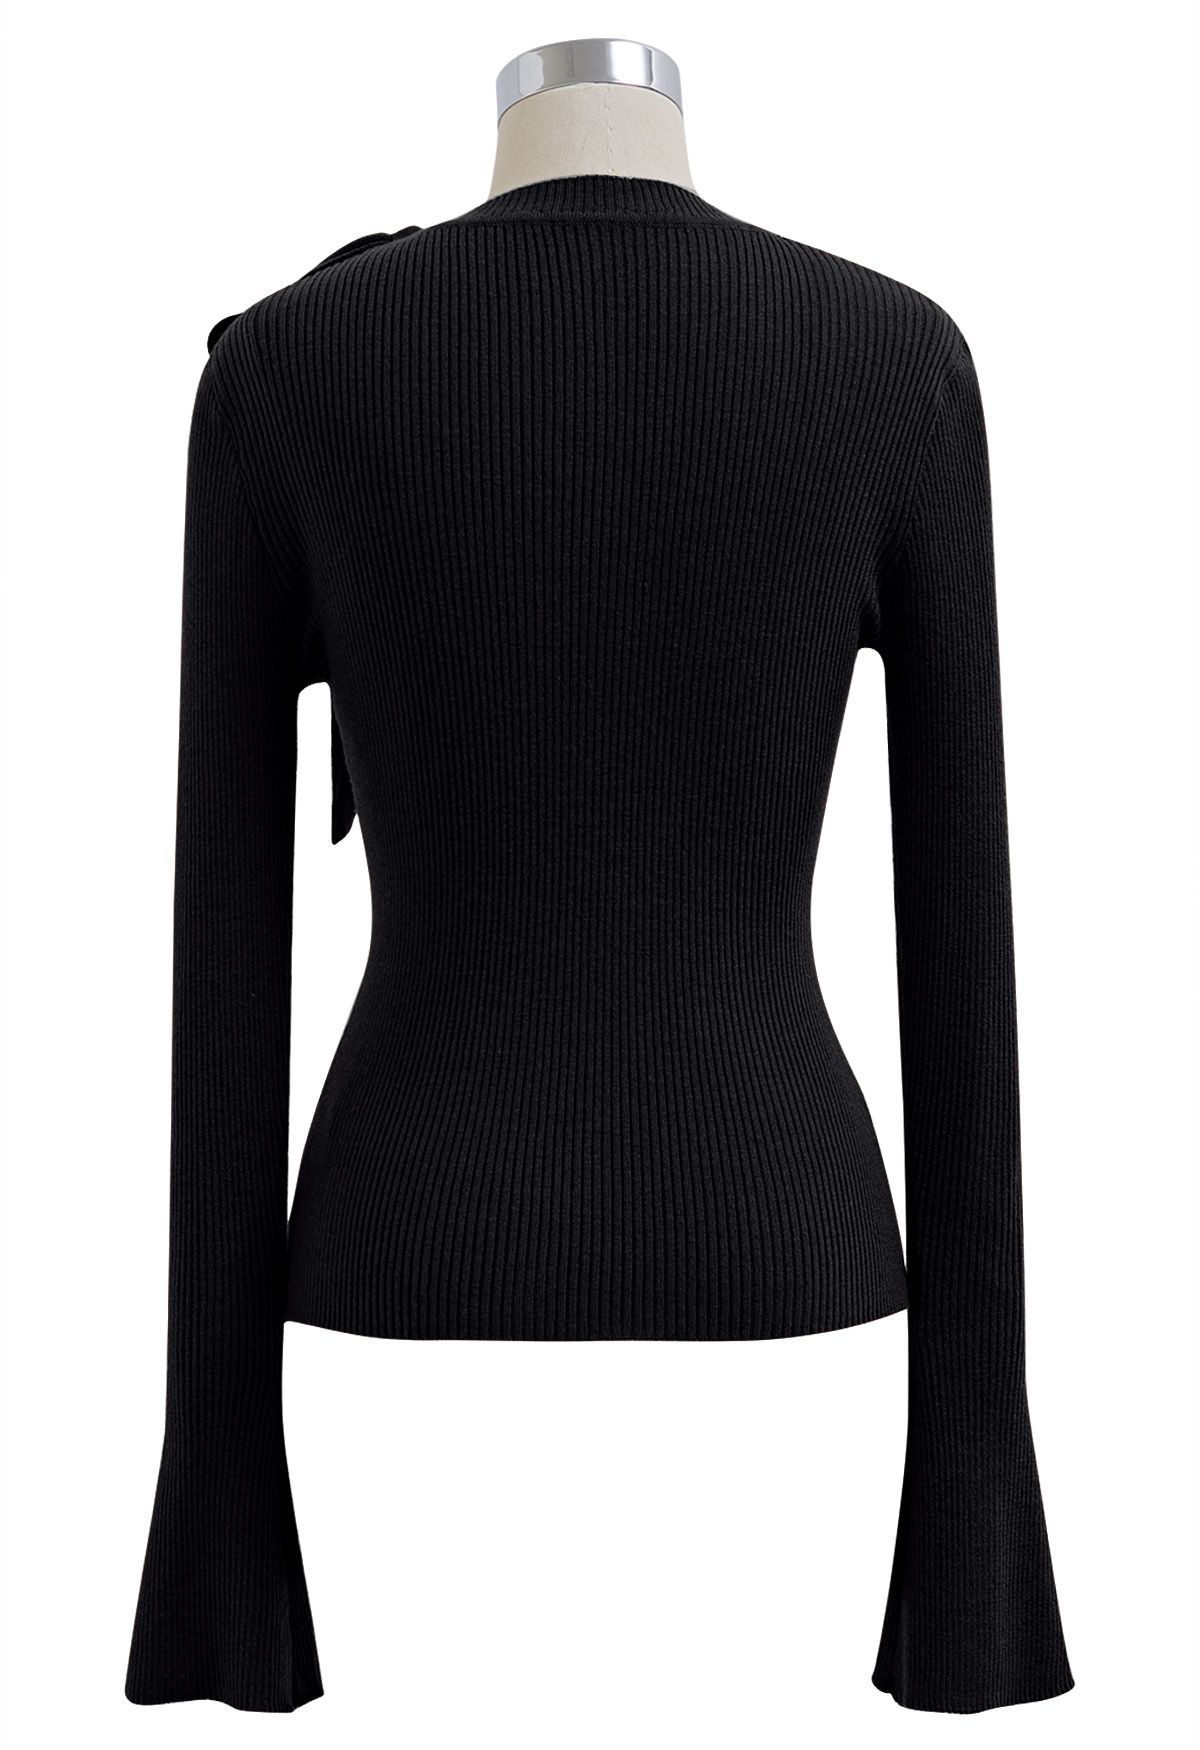 Mesh Inserted Side Bowknot Fitted Knit Top in Black | Chicwish